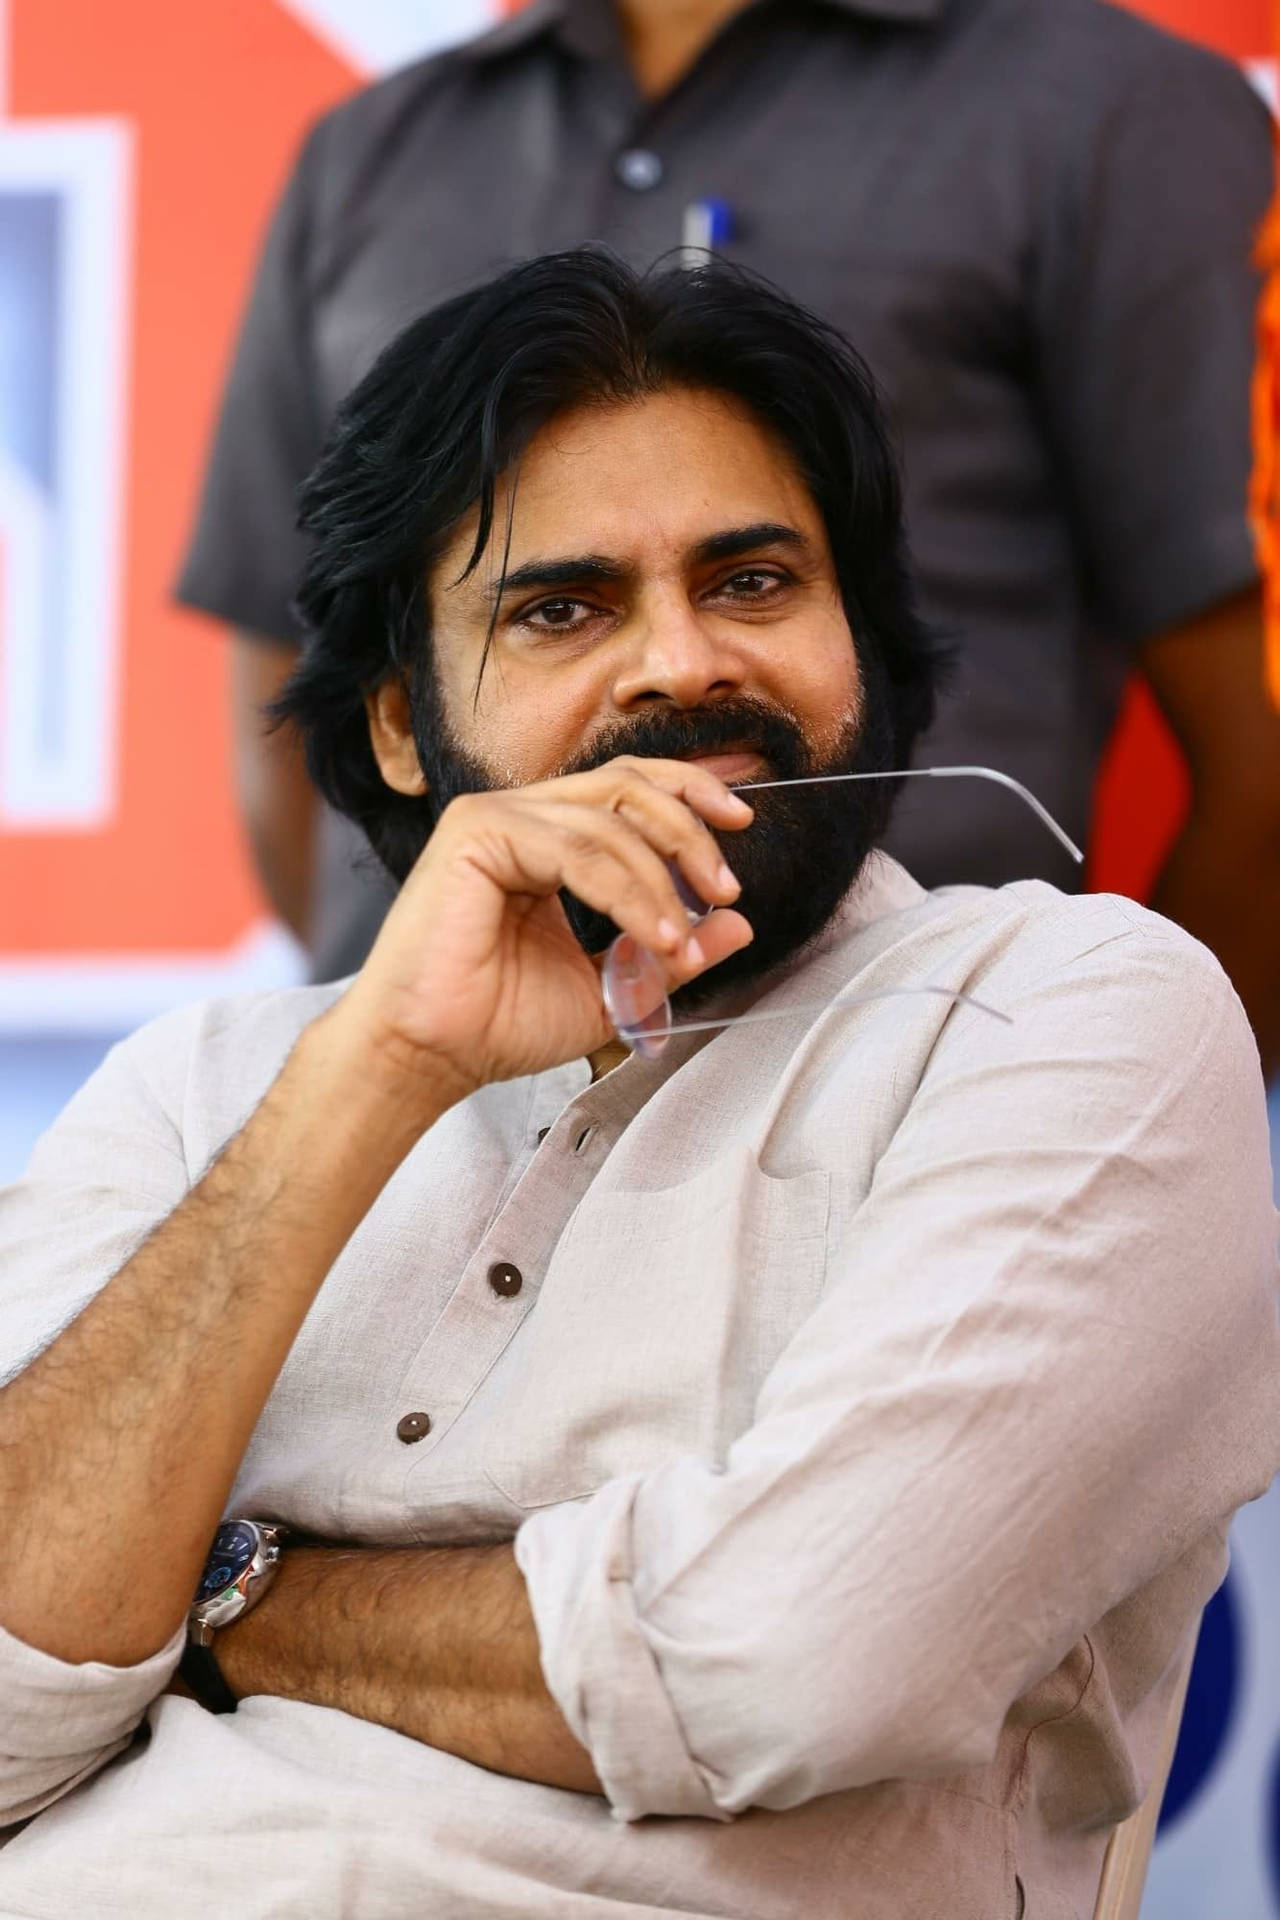 Pspk Pondering With Spectacles In Hand